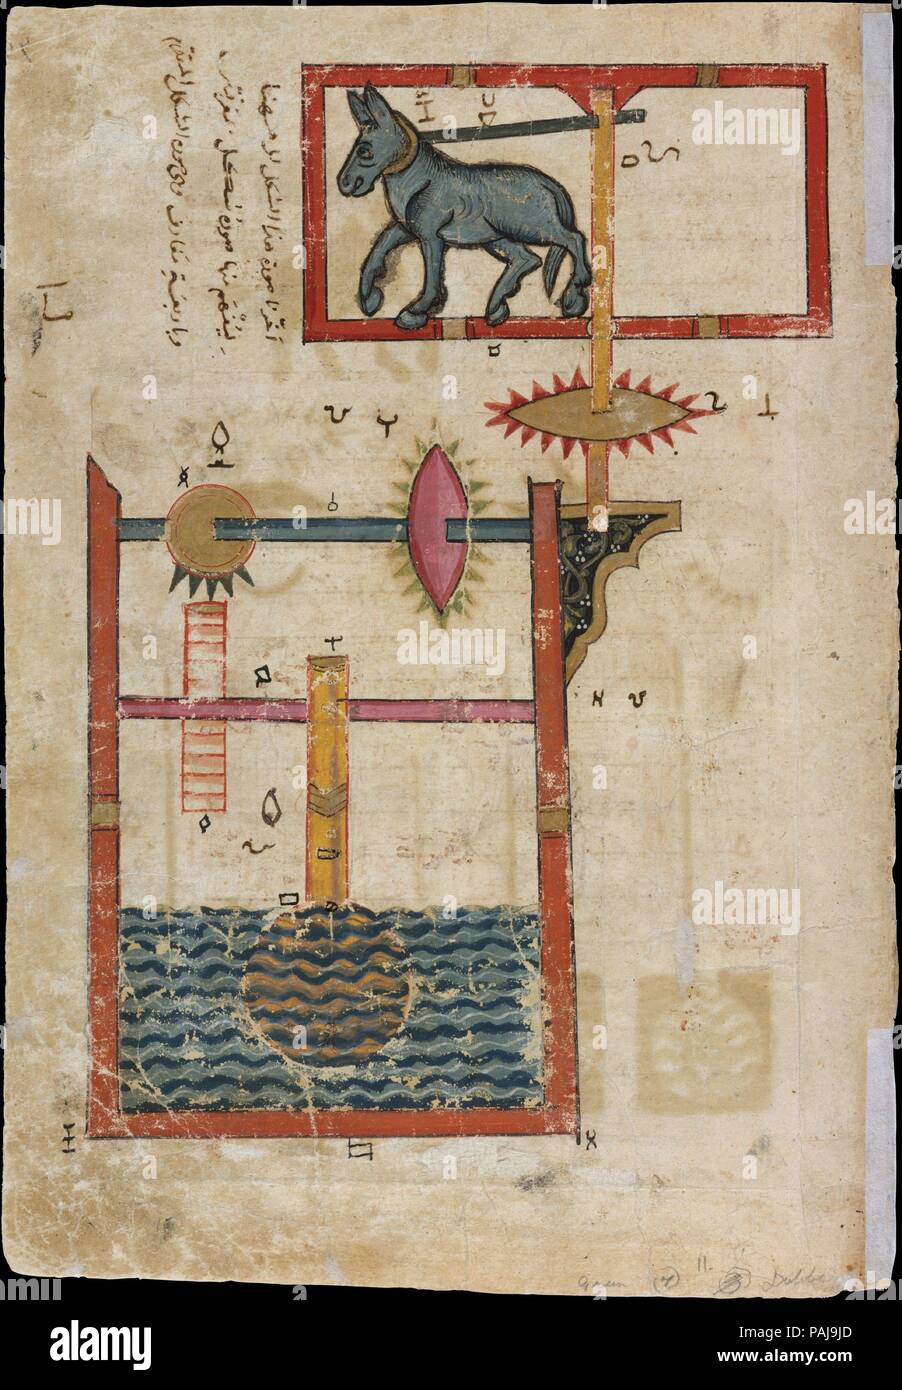 'Design on Each Side for Waterwheel Worked by Donkey Power', Folio from a Book of the Knowledge of Ingenious Mechanical Devices by al-Jazari. Artist: Copy by Farrukh ibn `Abd al-Latif. Author: Badi' al-Zaman ibn al-Razzaz al-Jazari (1136-1206). Dimensions: H. 11 5/8 in. (29. 5 cm)  W. 8 3/8 in.  (21.3 cm)  Mat size:    H. 19 in. (48.3 cm)   W. 14 1/4 in. (36.2 cm)  Frame:    H. 21 5/8 in. (54.9 cm)   W. 16 3/4 in. (42.5 cm). Date: dated A.H. 715/ A.D. 1315. Museum: Metropolitan Museum of Art, New York, USA. Stock Photo